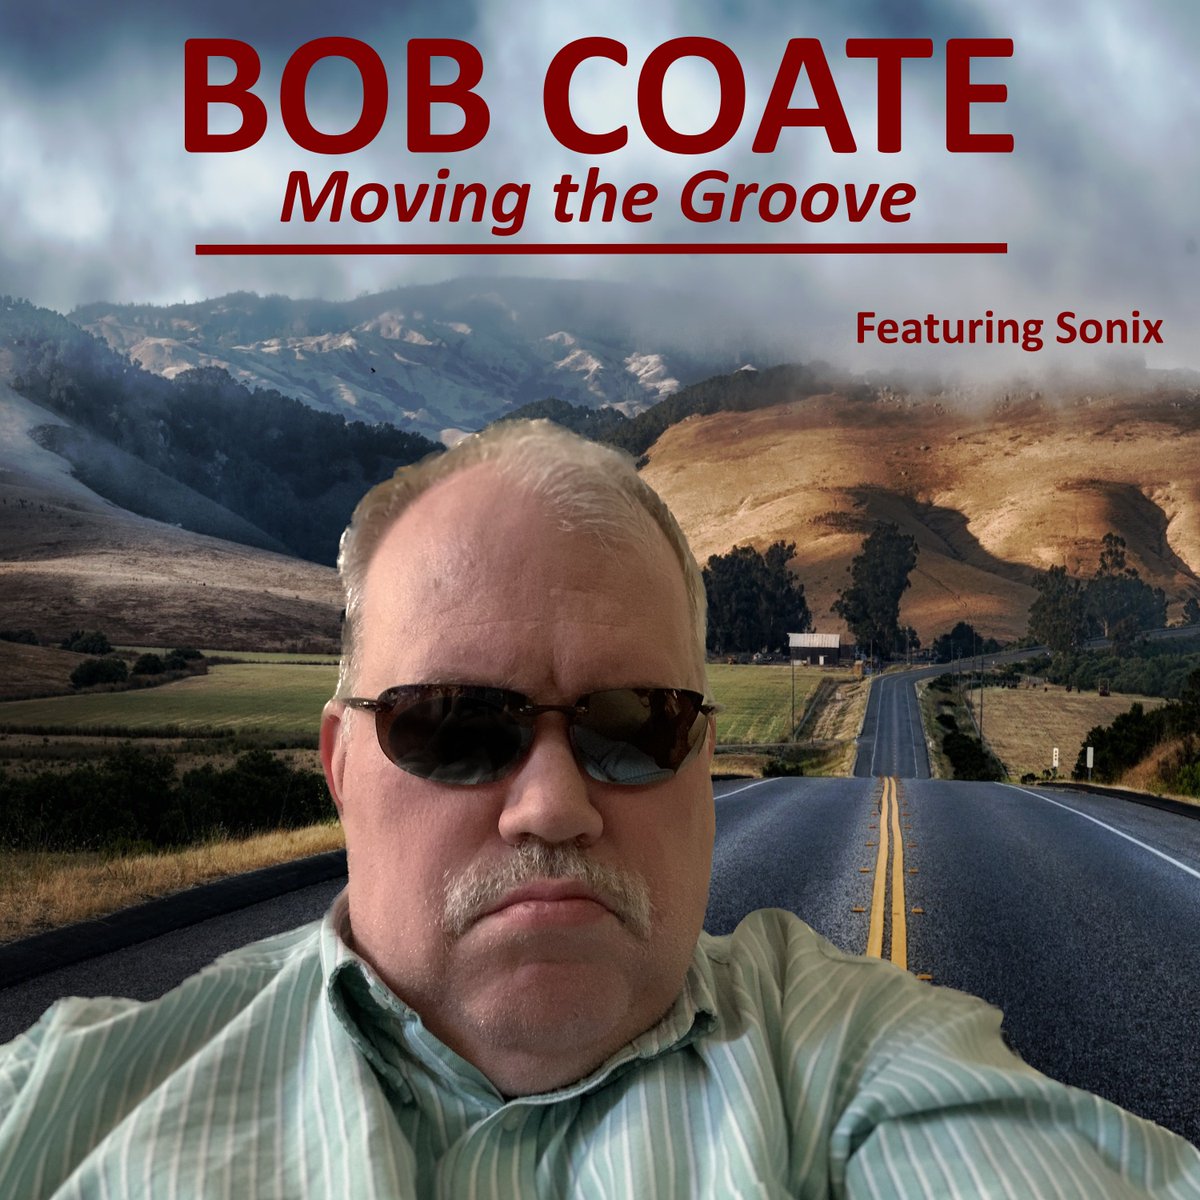 NEW RELEASE!   Bob Coate: 'Moving The Groove' (featuring Sonix) - Available today on all streaming platforms!

Once again it was an honor and a privilege to collaborate with world-class producer and guest artist Sonix on this track.

#NewMusicFriday #smoothjazznews @IAMSONIX